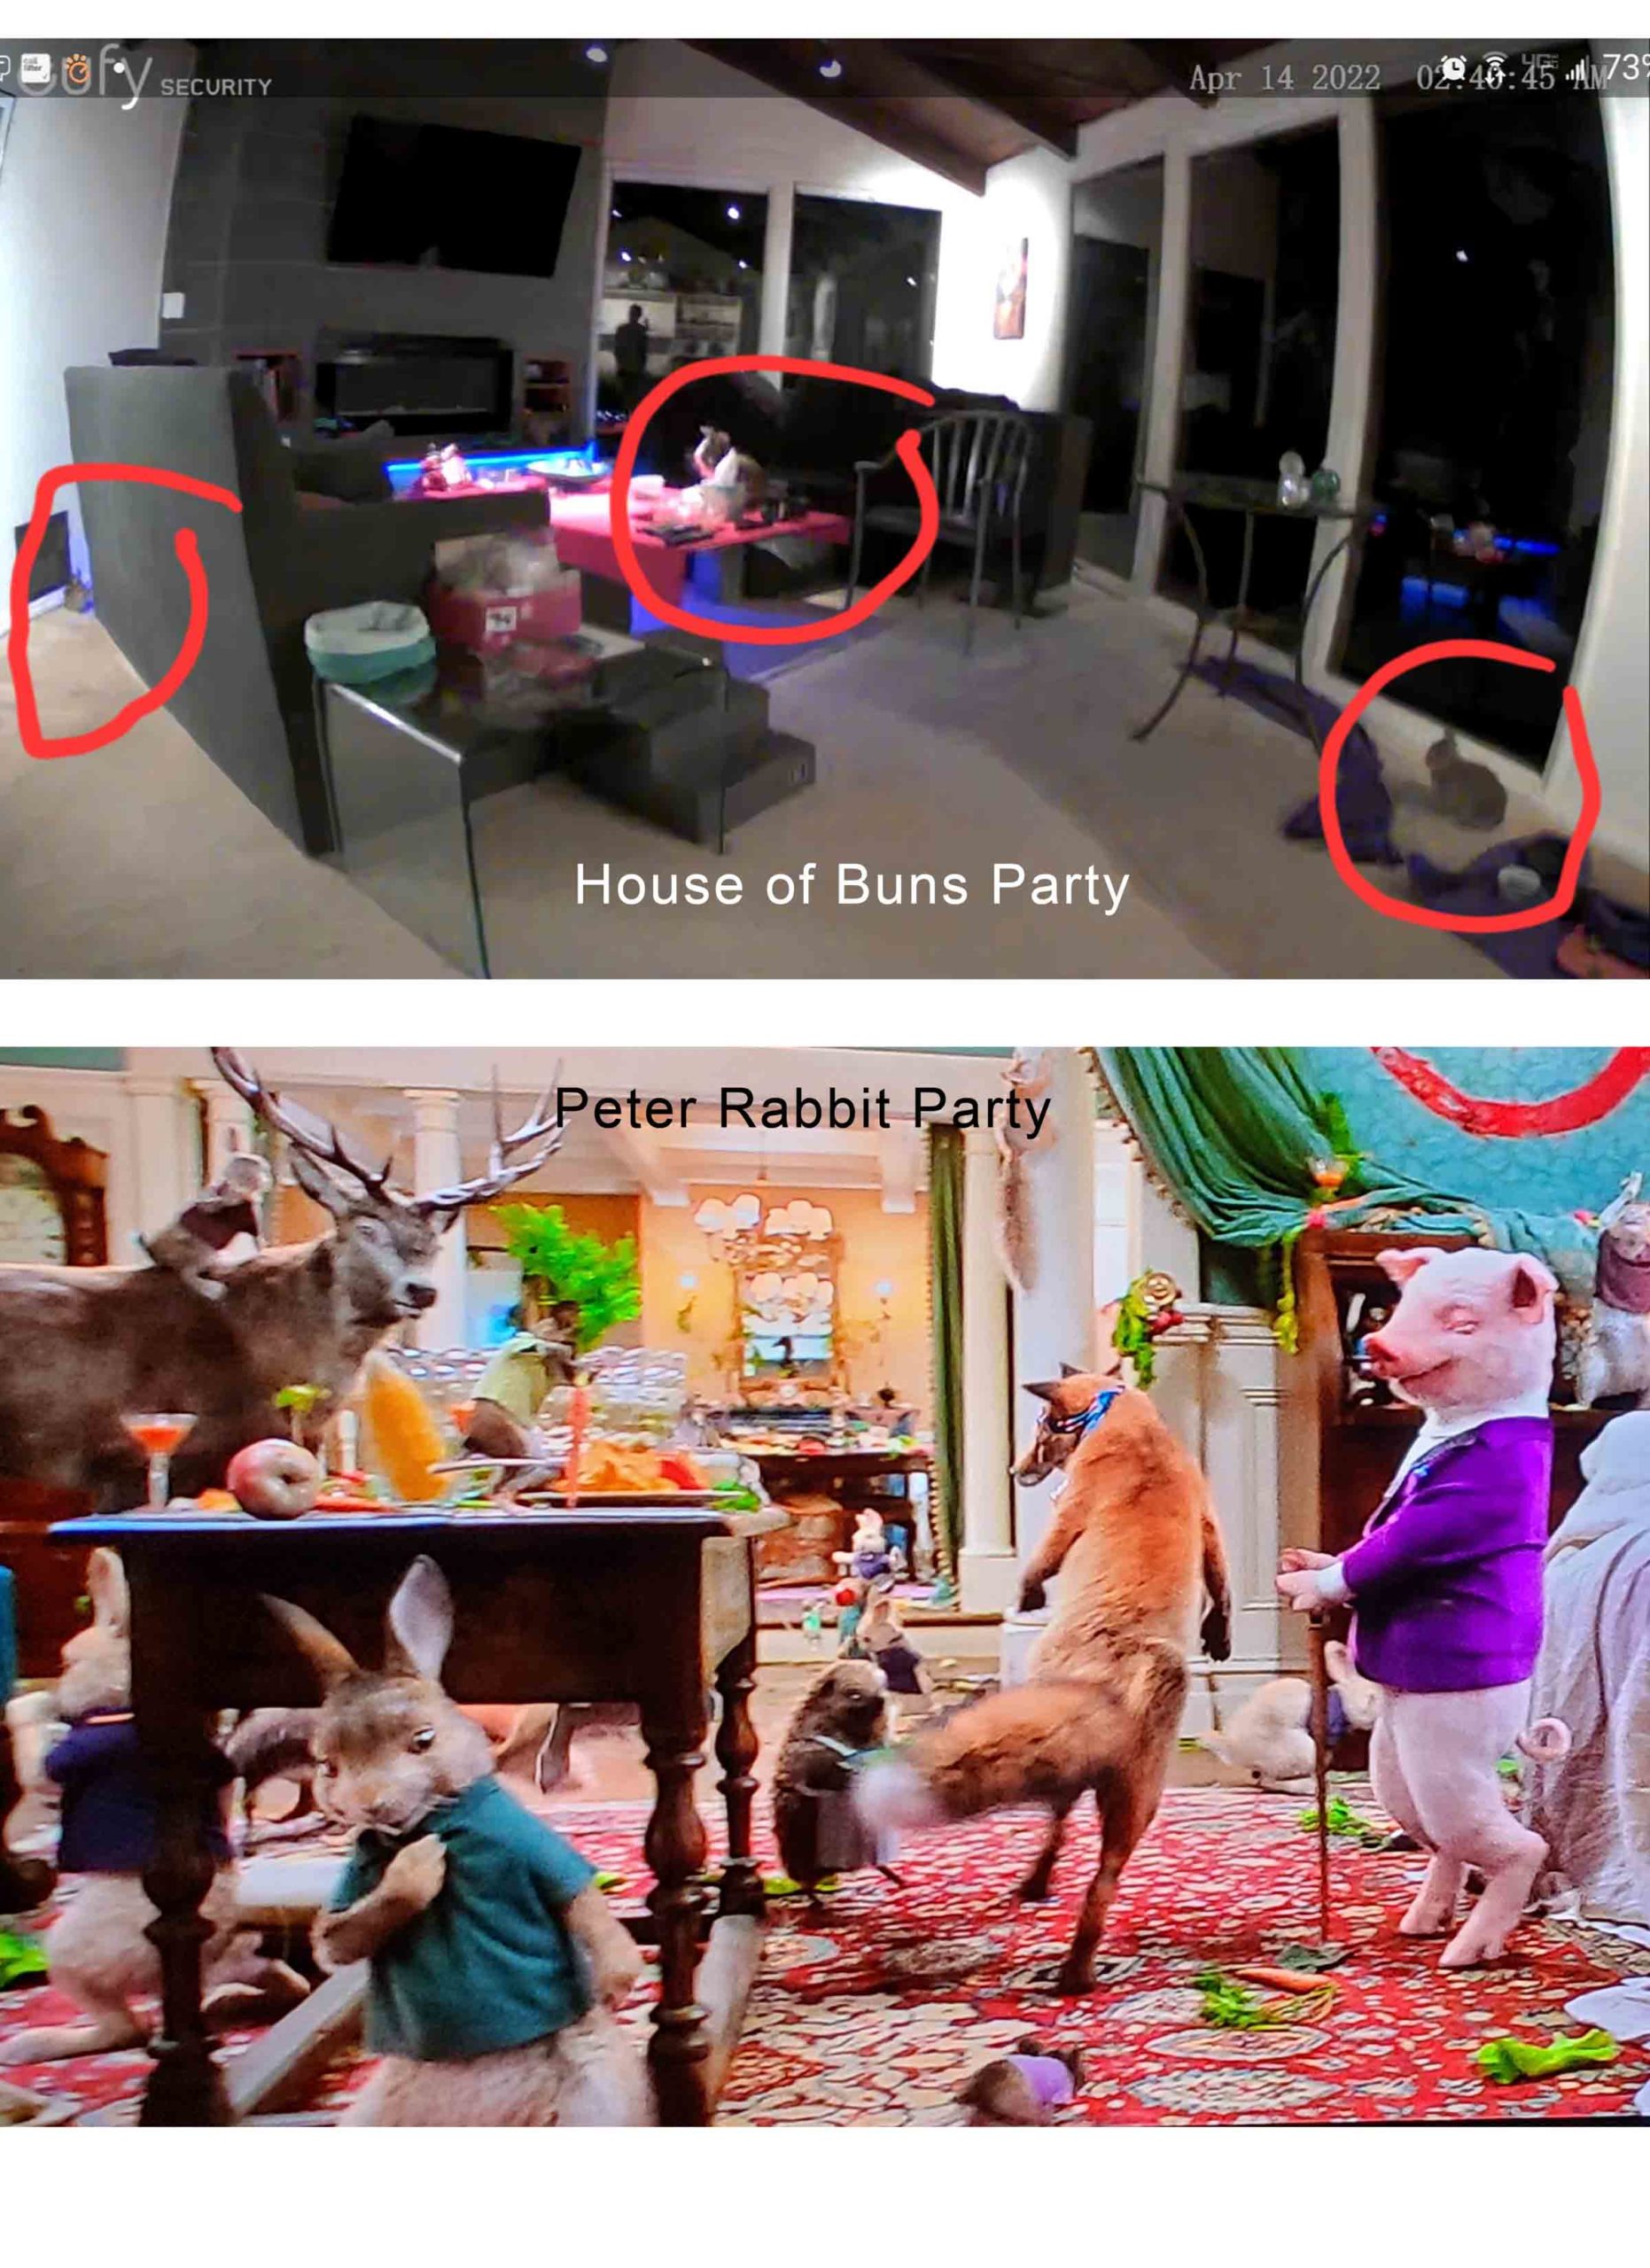 The party at the House of Buns reminds Dad of the party scene in the movie Peter Rabbit